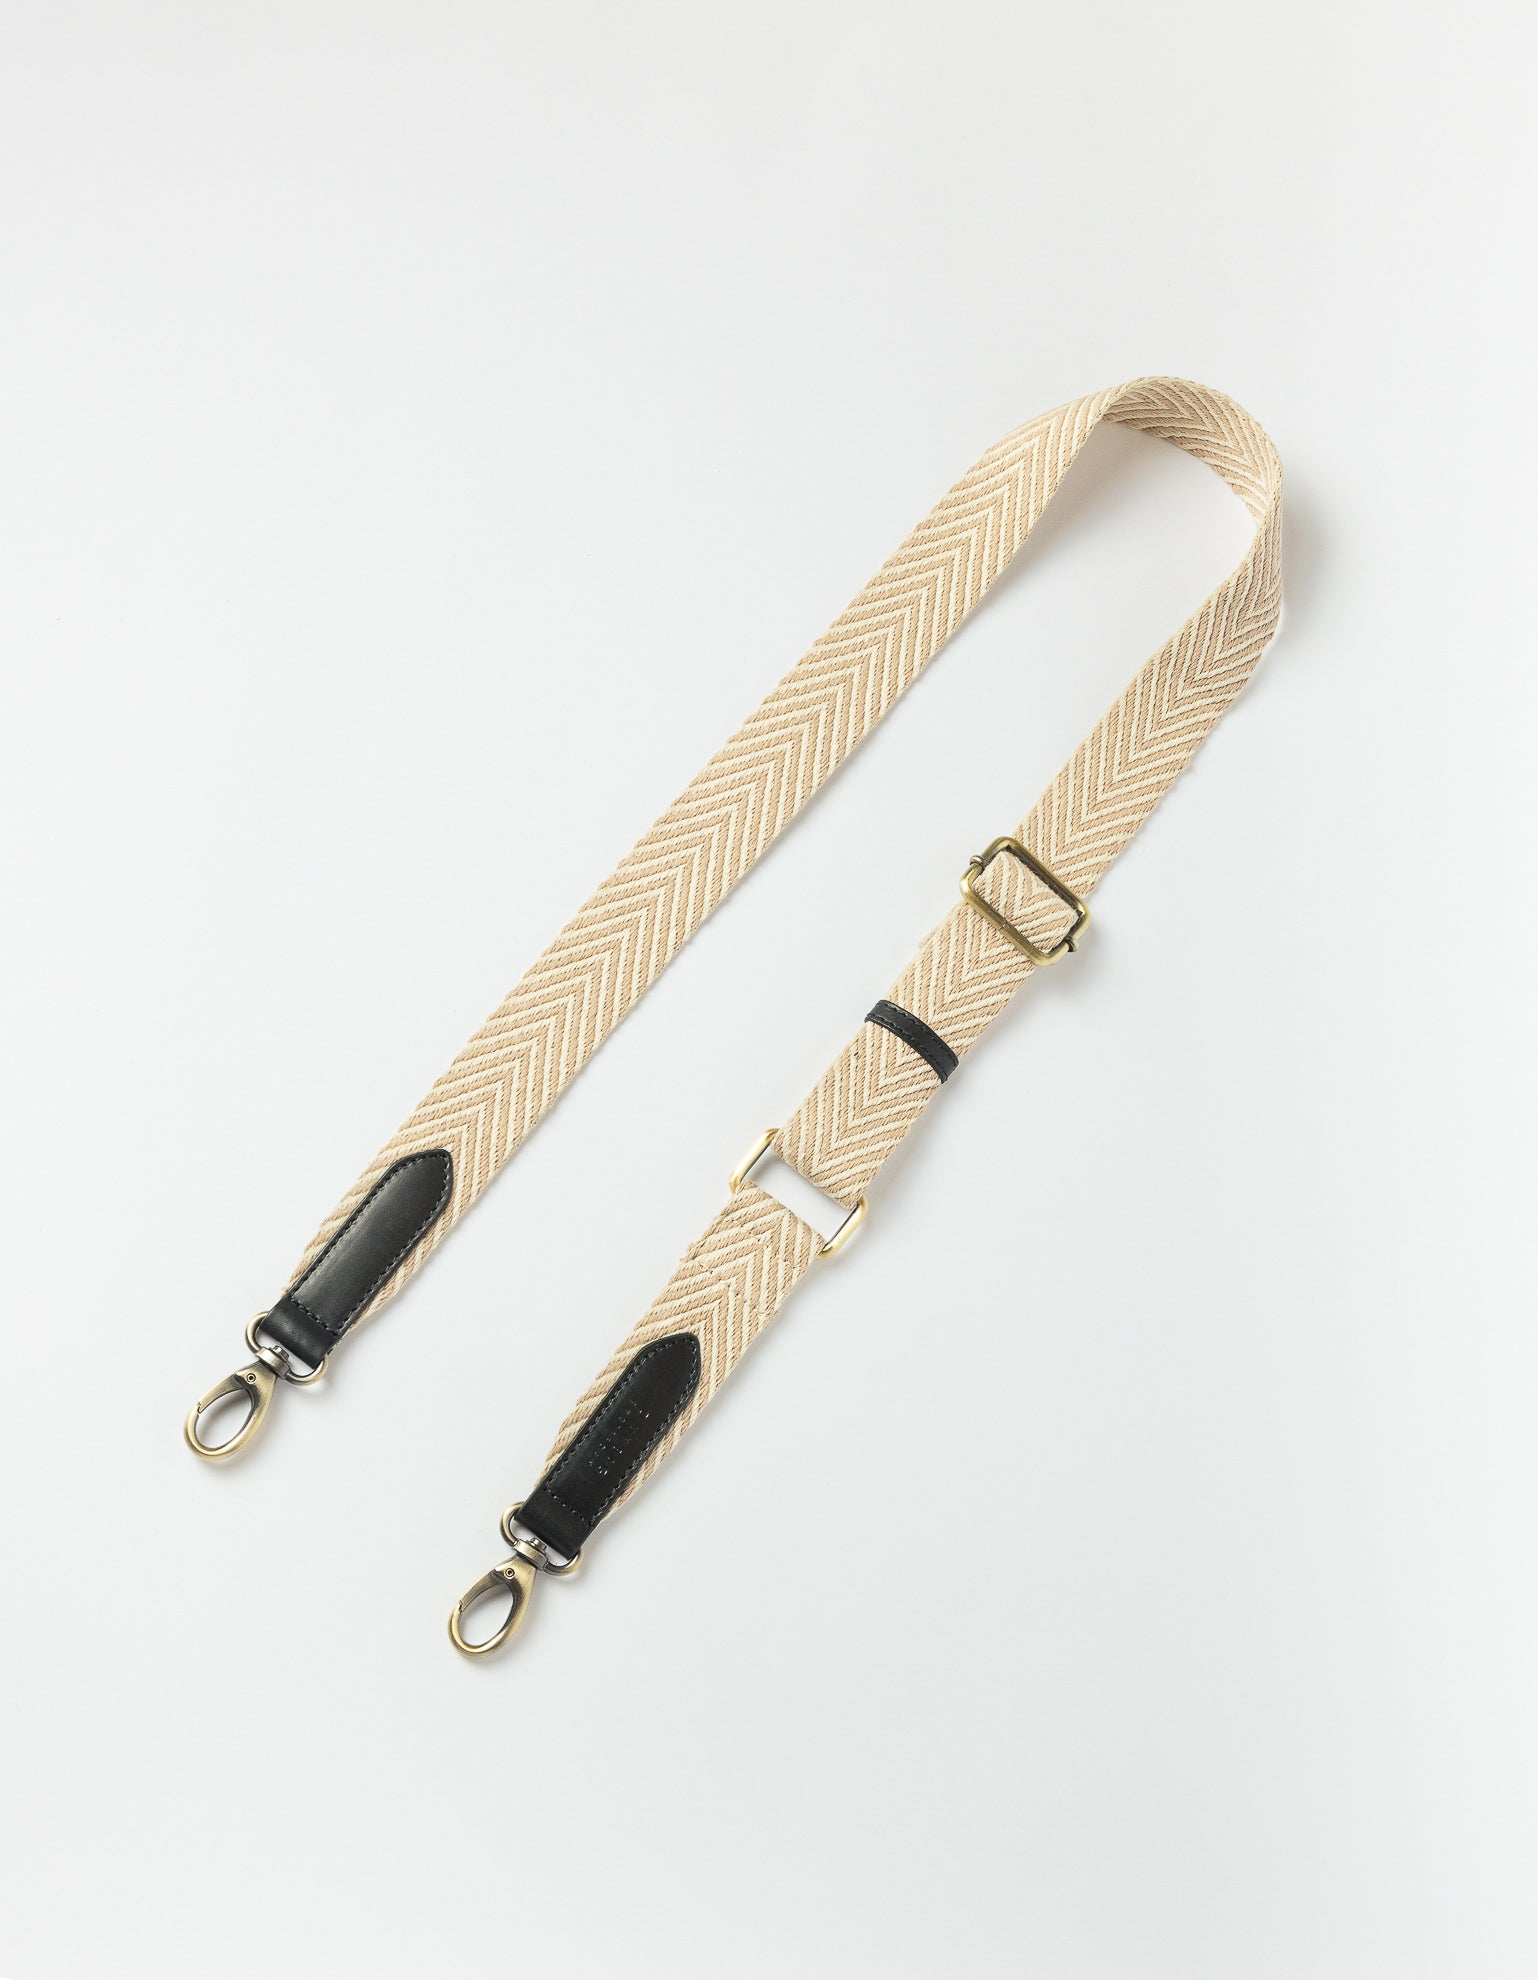 Organic cotton webbing strap in sand with black leather - Product image